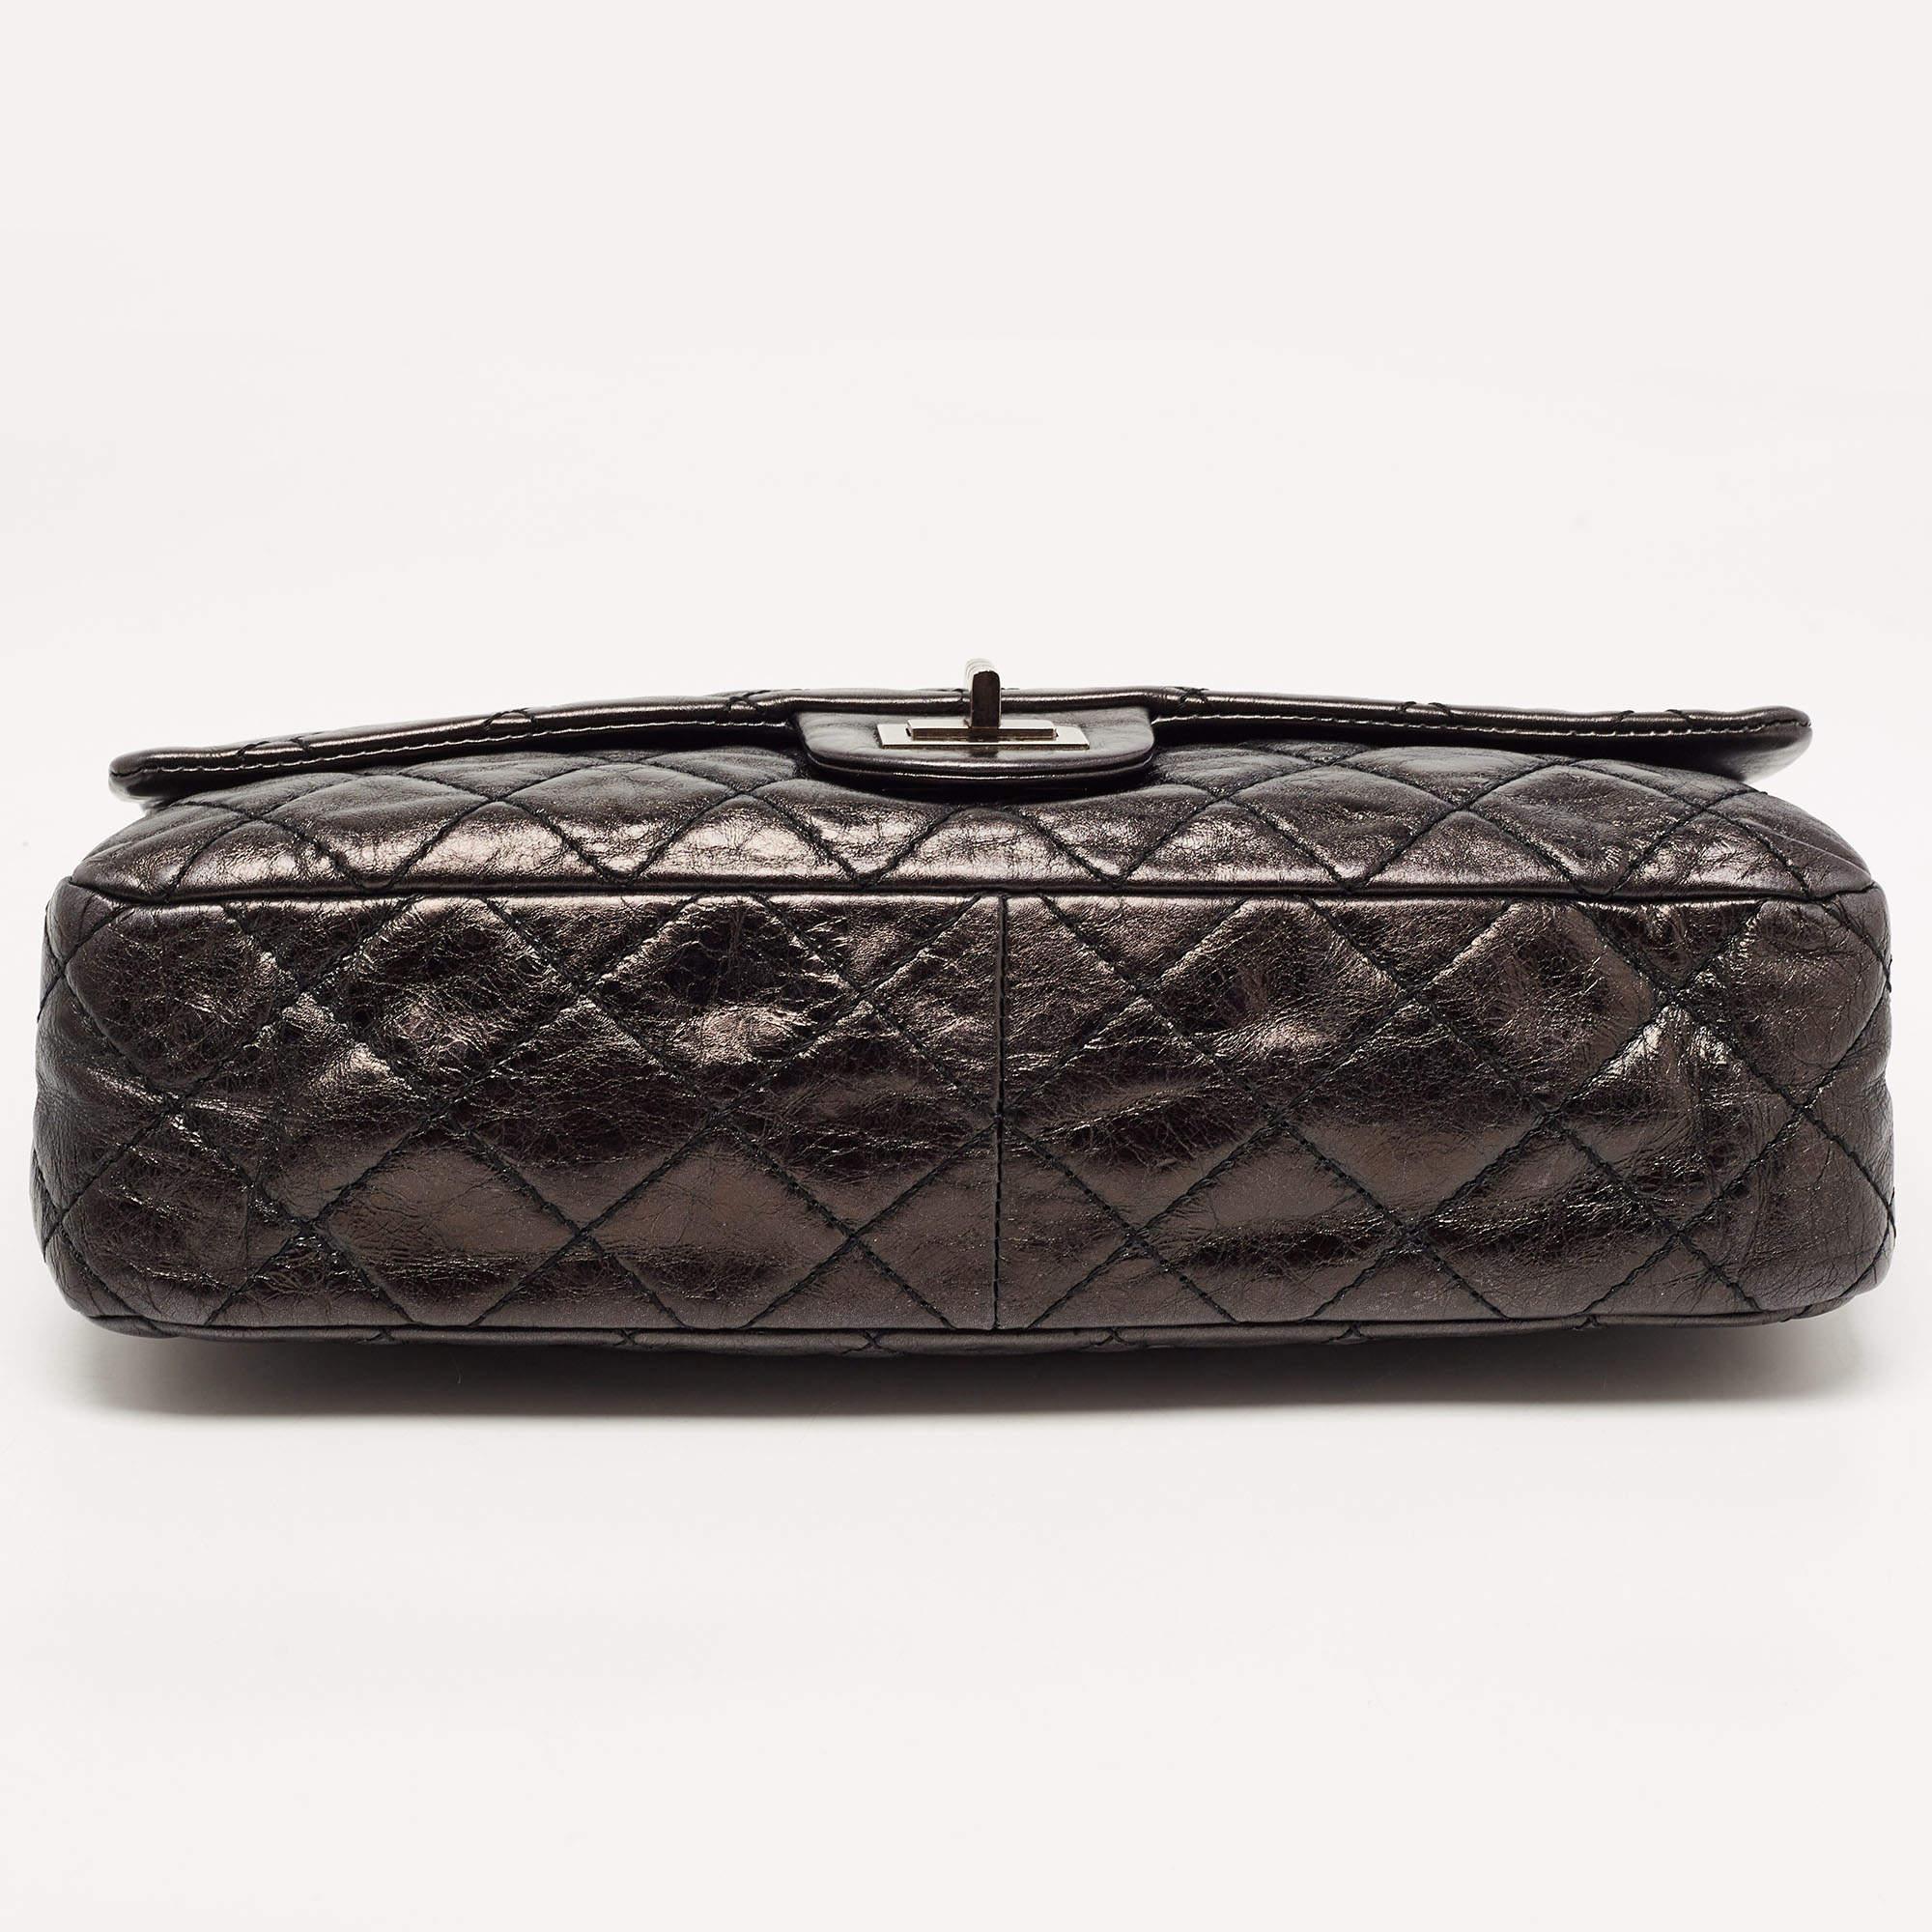 Chanel Metallic Grey/Black Quilted Leather 226 Reissue 2.55 Flap Bag For Sale 1